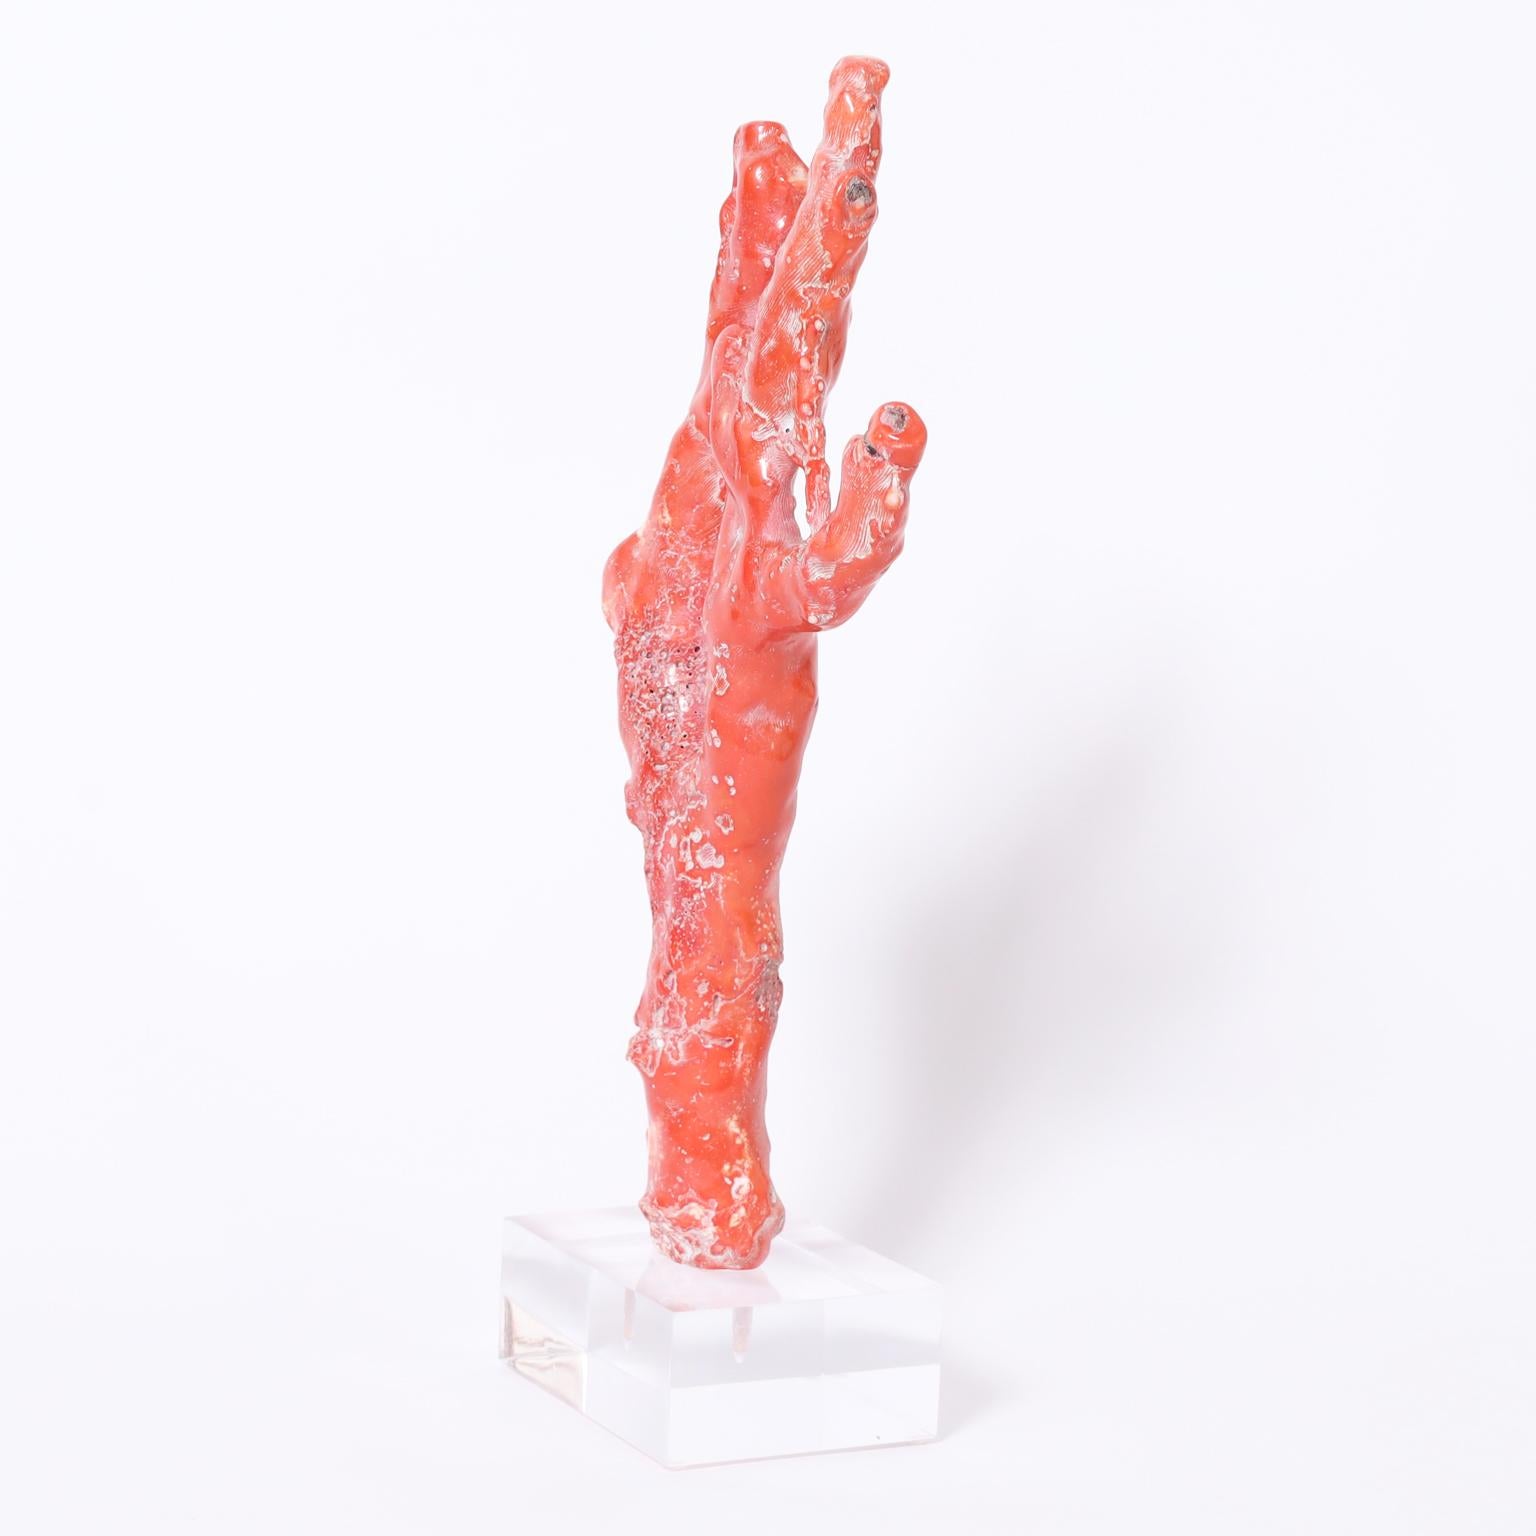 Striking large organic red coral specimen with its unique ocean inspired form and alluring color. Presented on a lucite base to enhance the sculptural elements.

Available only in the United States of America, shipping outside of the country